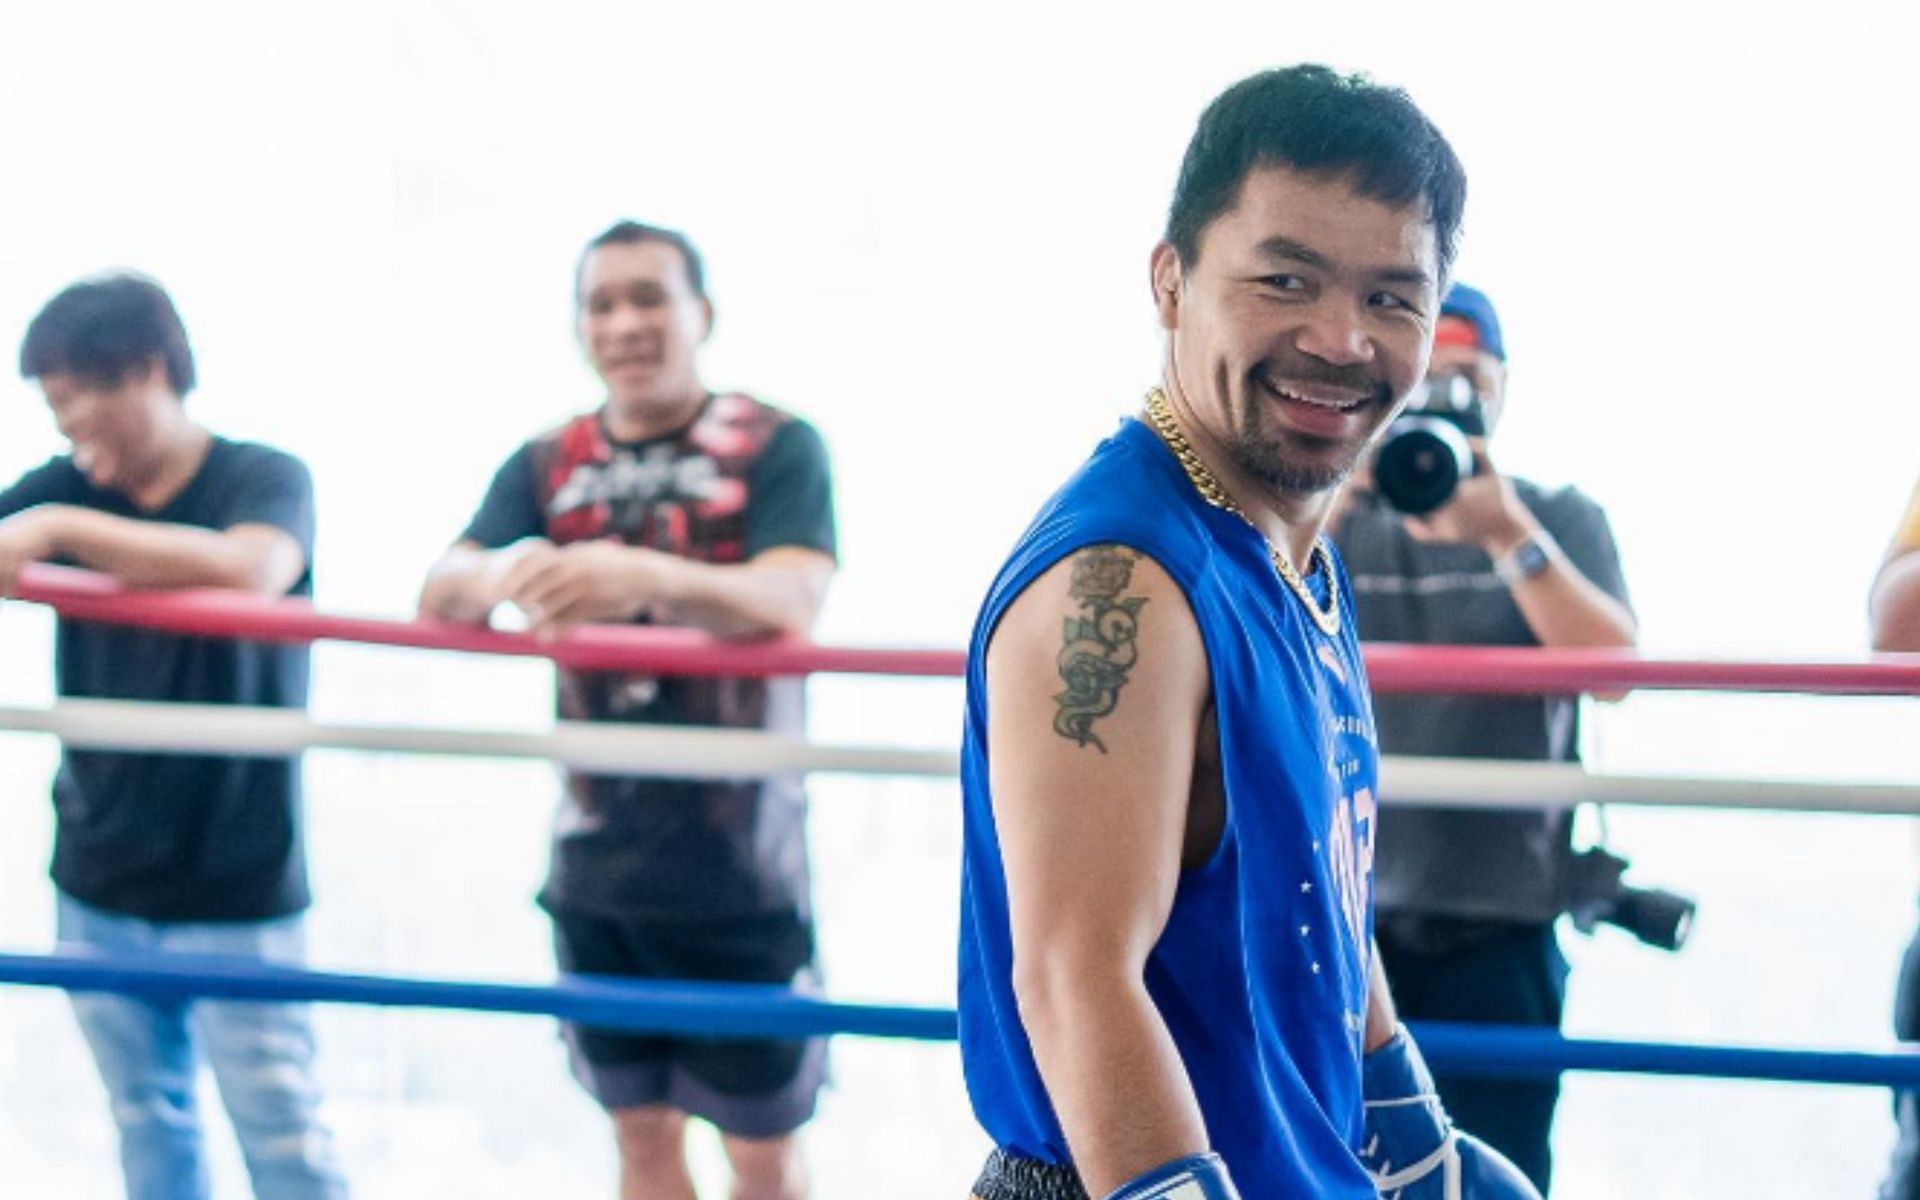 Manny Pacquiao is set to return to the ring this year. [Image via @mannypacquiao on Instagram]